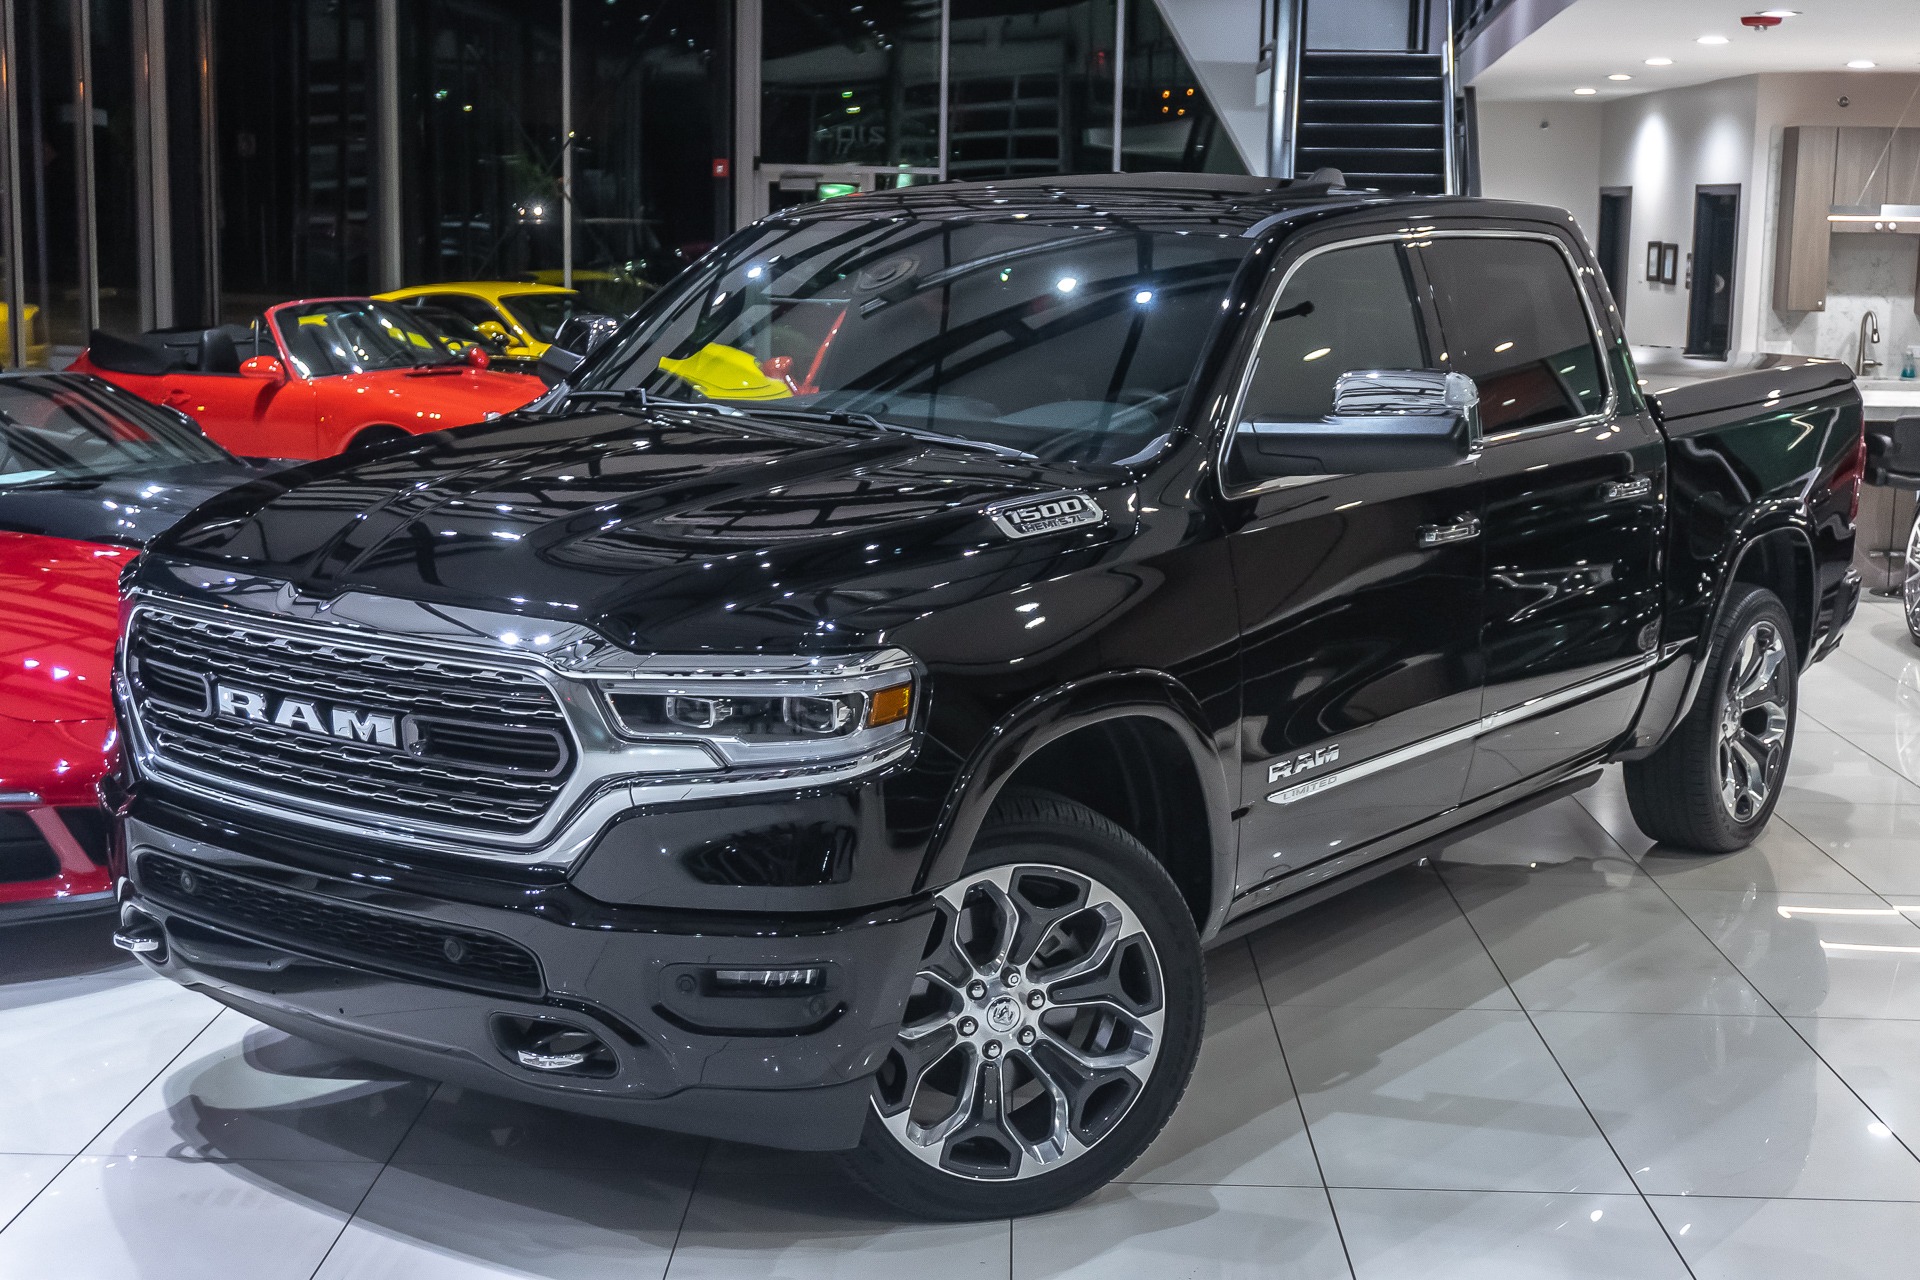 Used 2019 Dodge Ram 1500 Limited Crew Cab 4X4 Pickup MOTOR TRENDS 2019 TRUCK  OF THE YEAR! For Sale (Special Pricing) | Chicago Motor Cars Stock #16177A